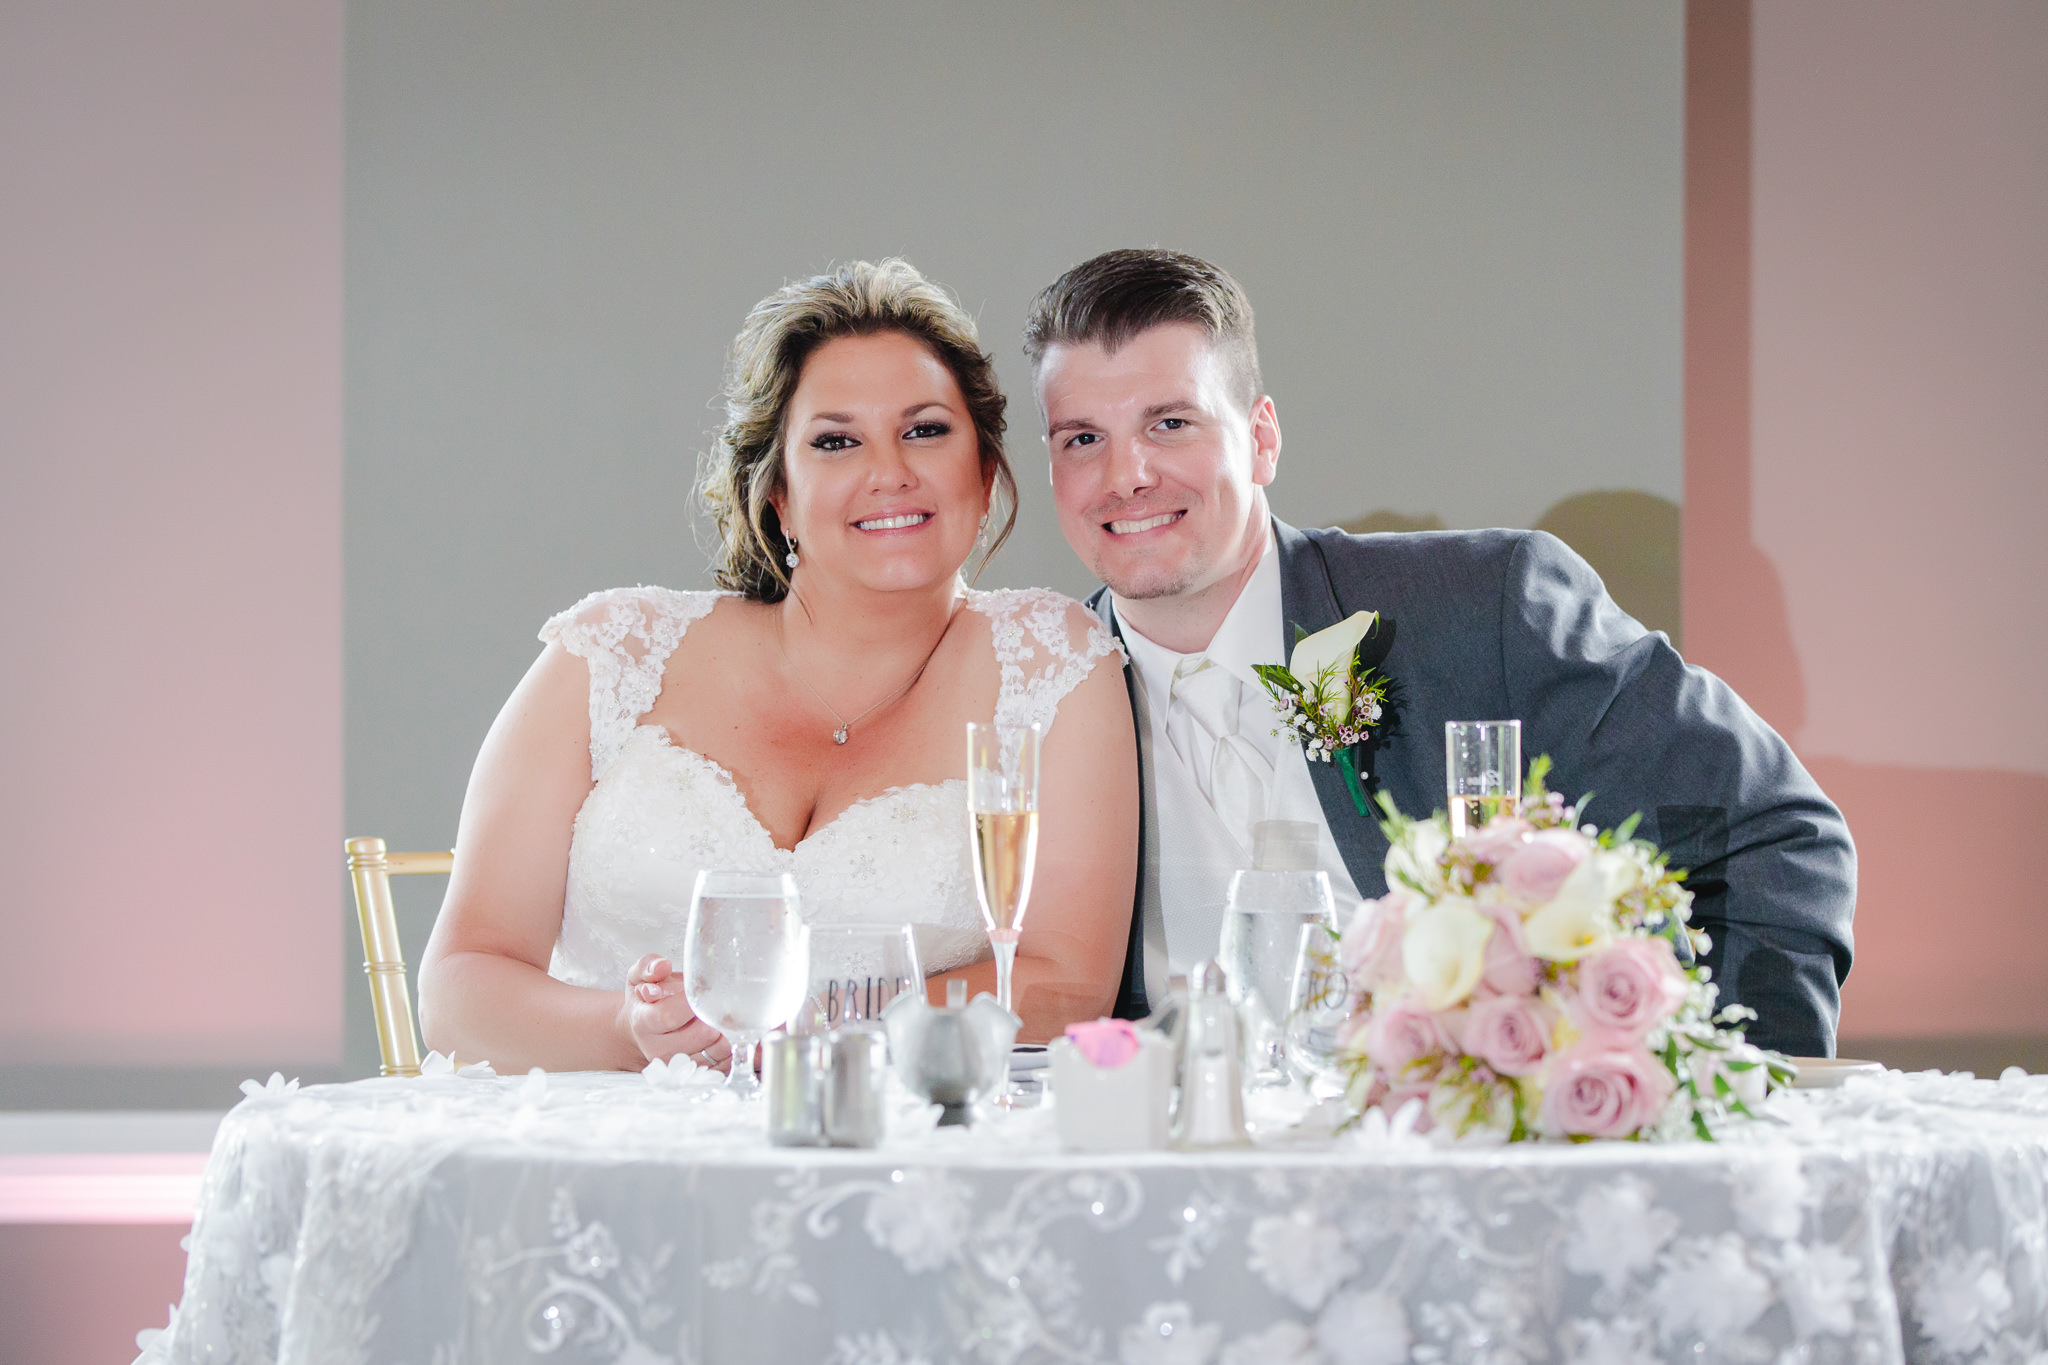 Bride and groom pose for a photo at their sweetheart table